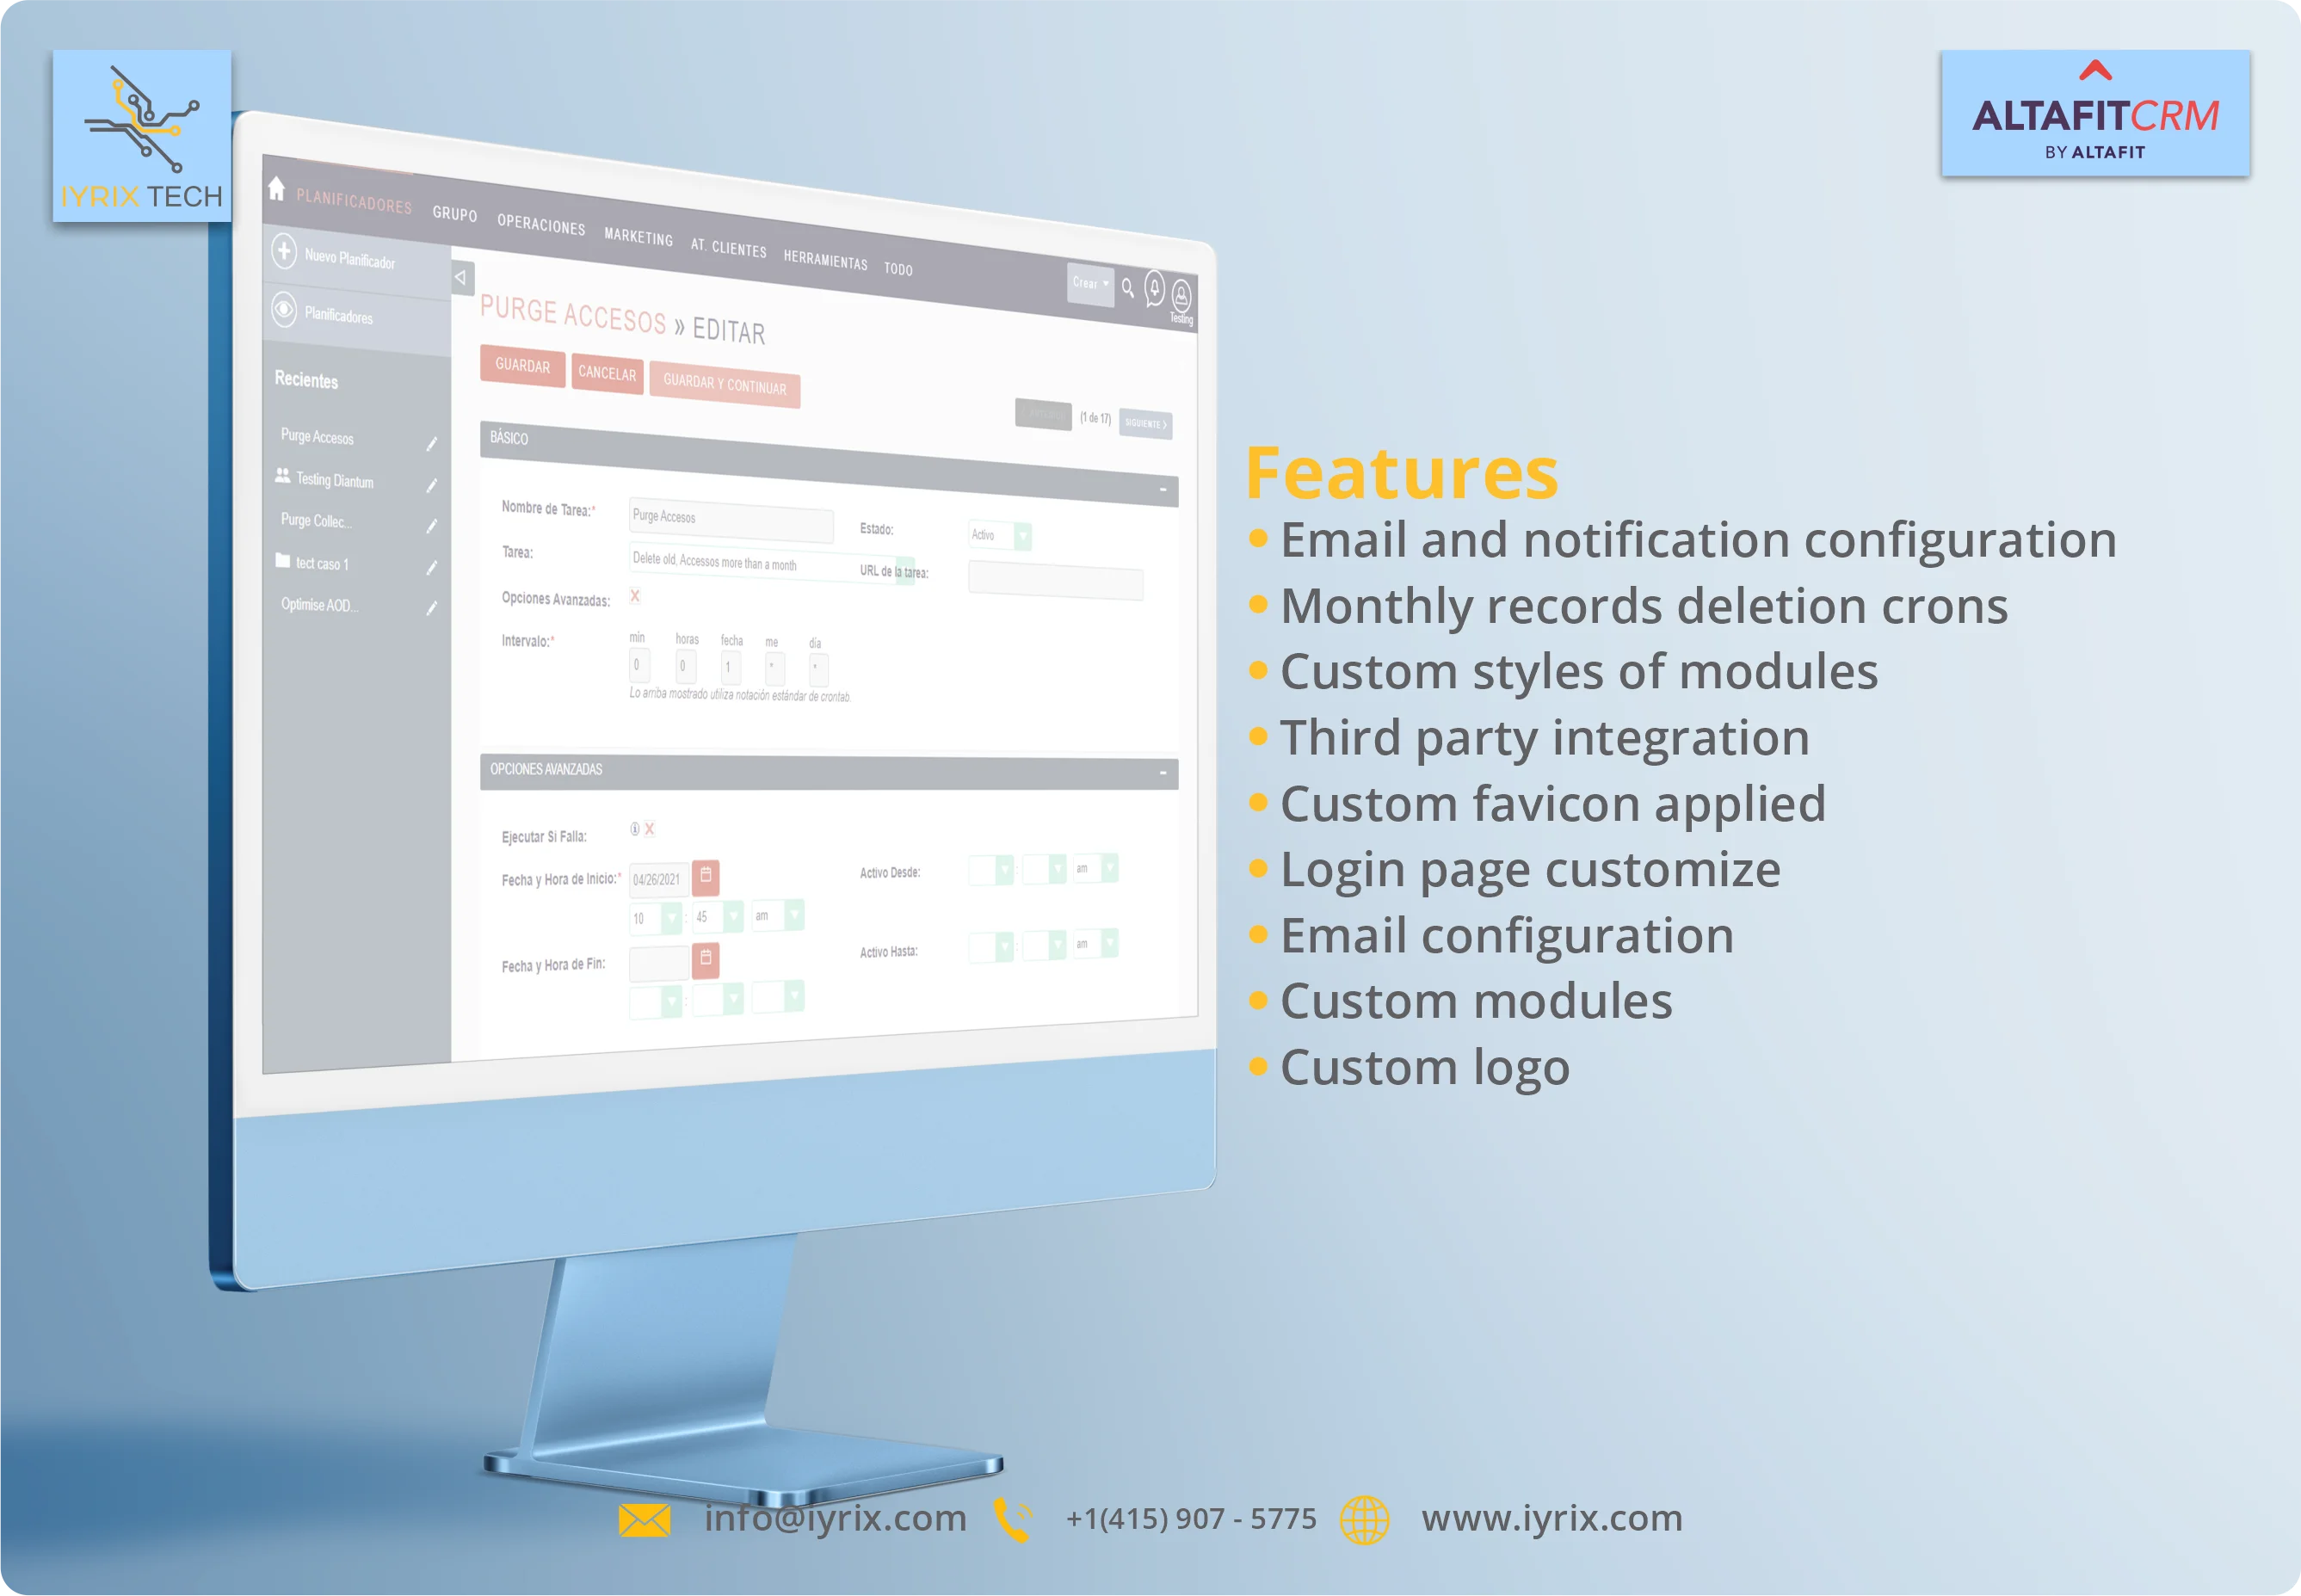 AltafitCRM features 

                                                                - Third party Integration 
                                                                - Monthly records deletion crons
                                                                - Email and notification configuration
                                                                - Custom modules 
                                                                - Custom styles of modules 
                                                                - login page customize
                                                                - custom logo 
                                                                - custom favicon applied 
                                                                - email configuration 